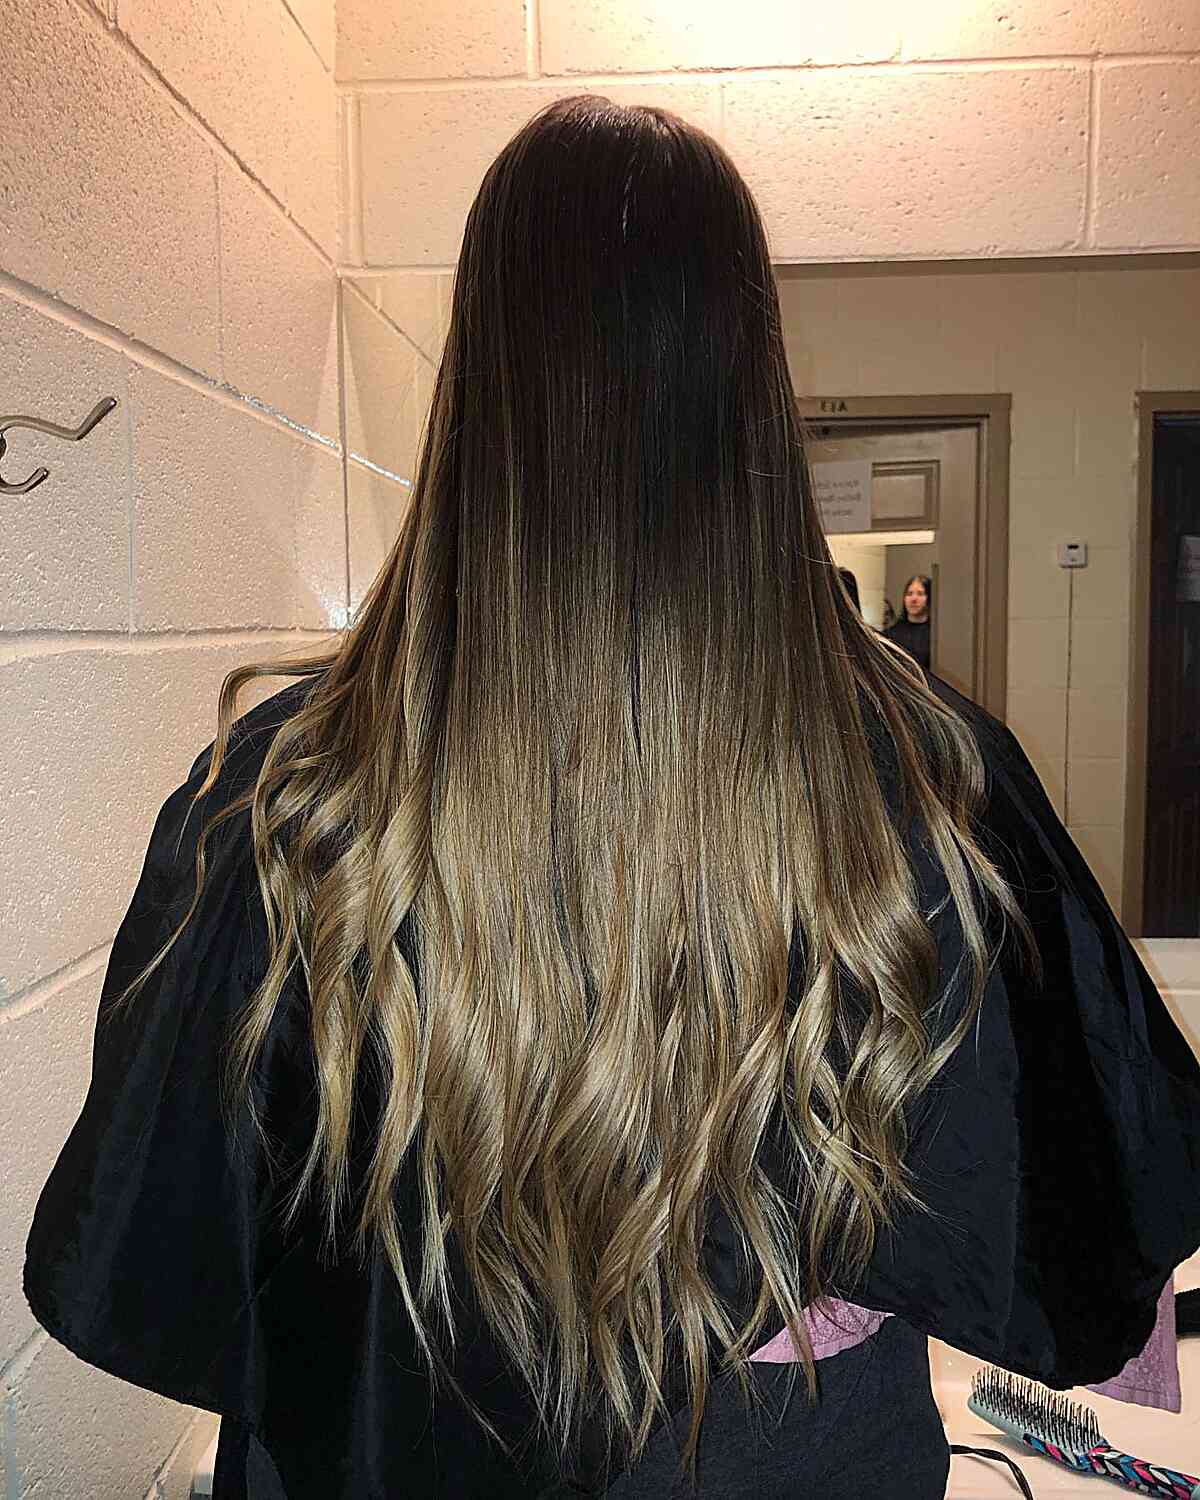 Long V-Shaped Black to Bronde Ombre Hair with Curled Ends